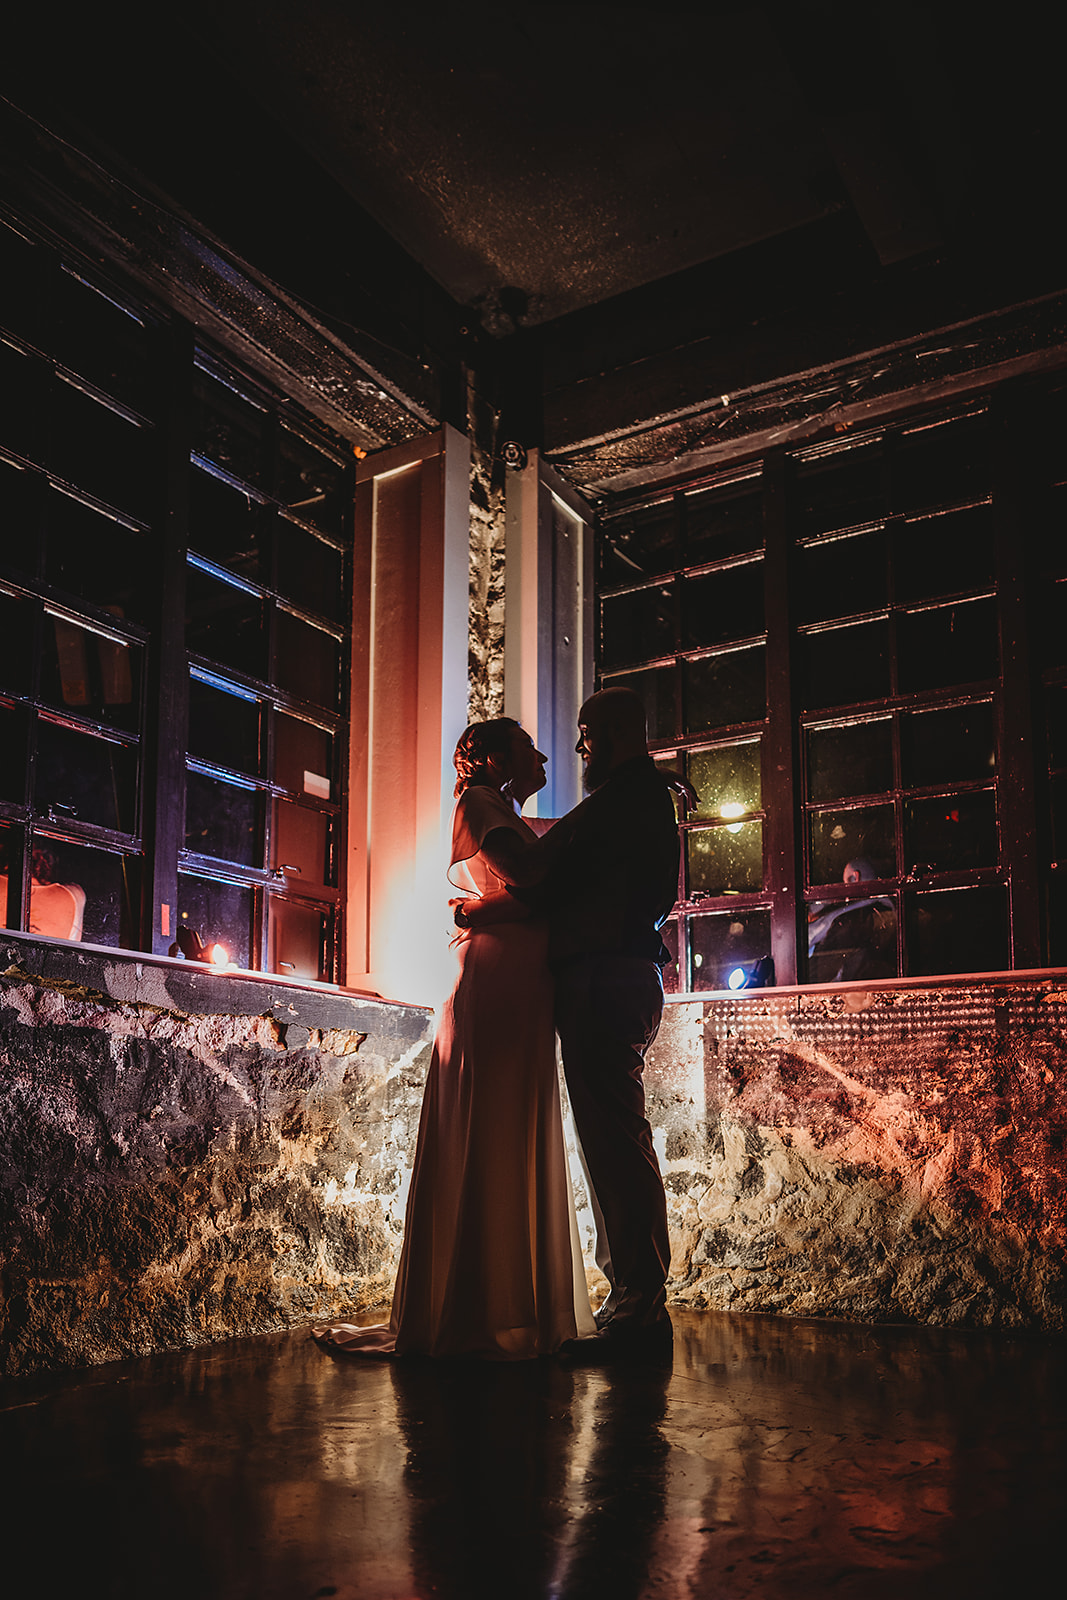 Baltimore wedding photographers captures night time wedding photography with bride adn groom embracing in a stone house with industrial windows while purple and red light shines behind them